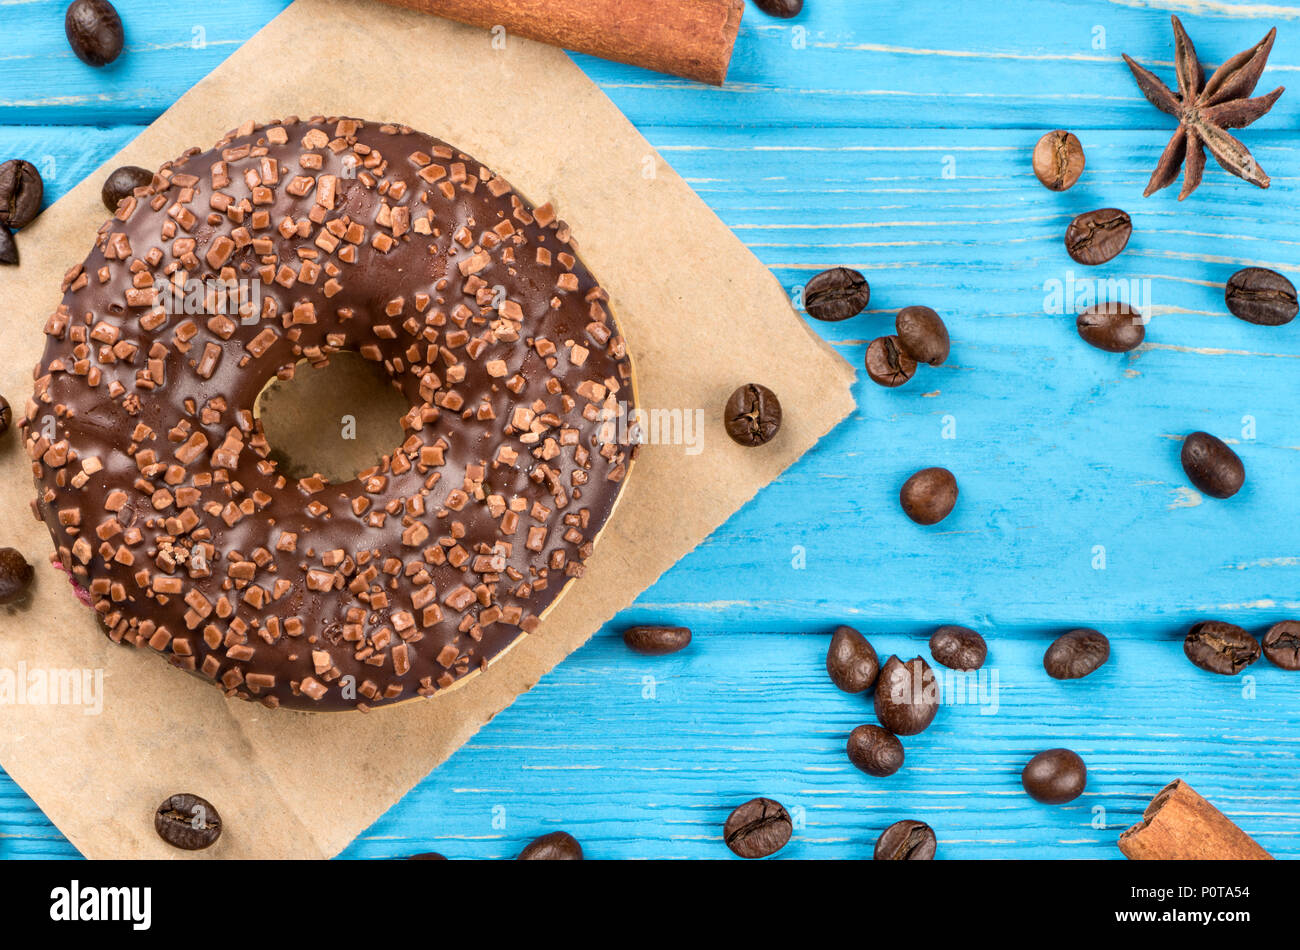 Chocolate donut with scattered grains of coffee and spices on a wooden background, top view Stock Photo